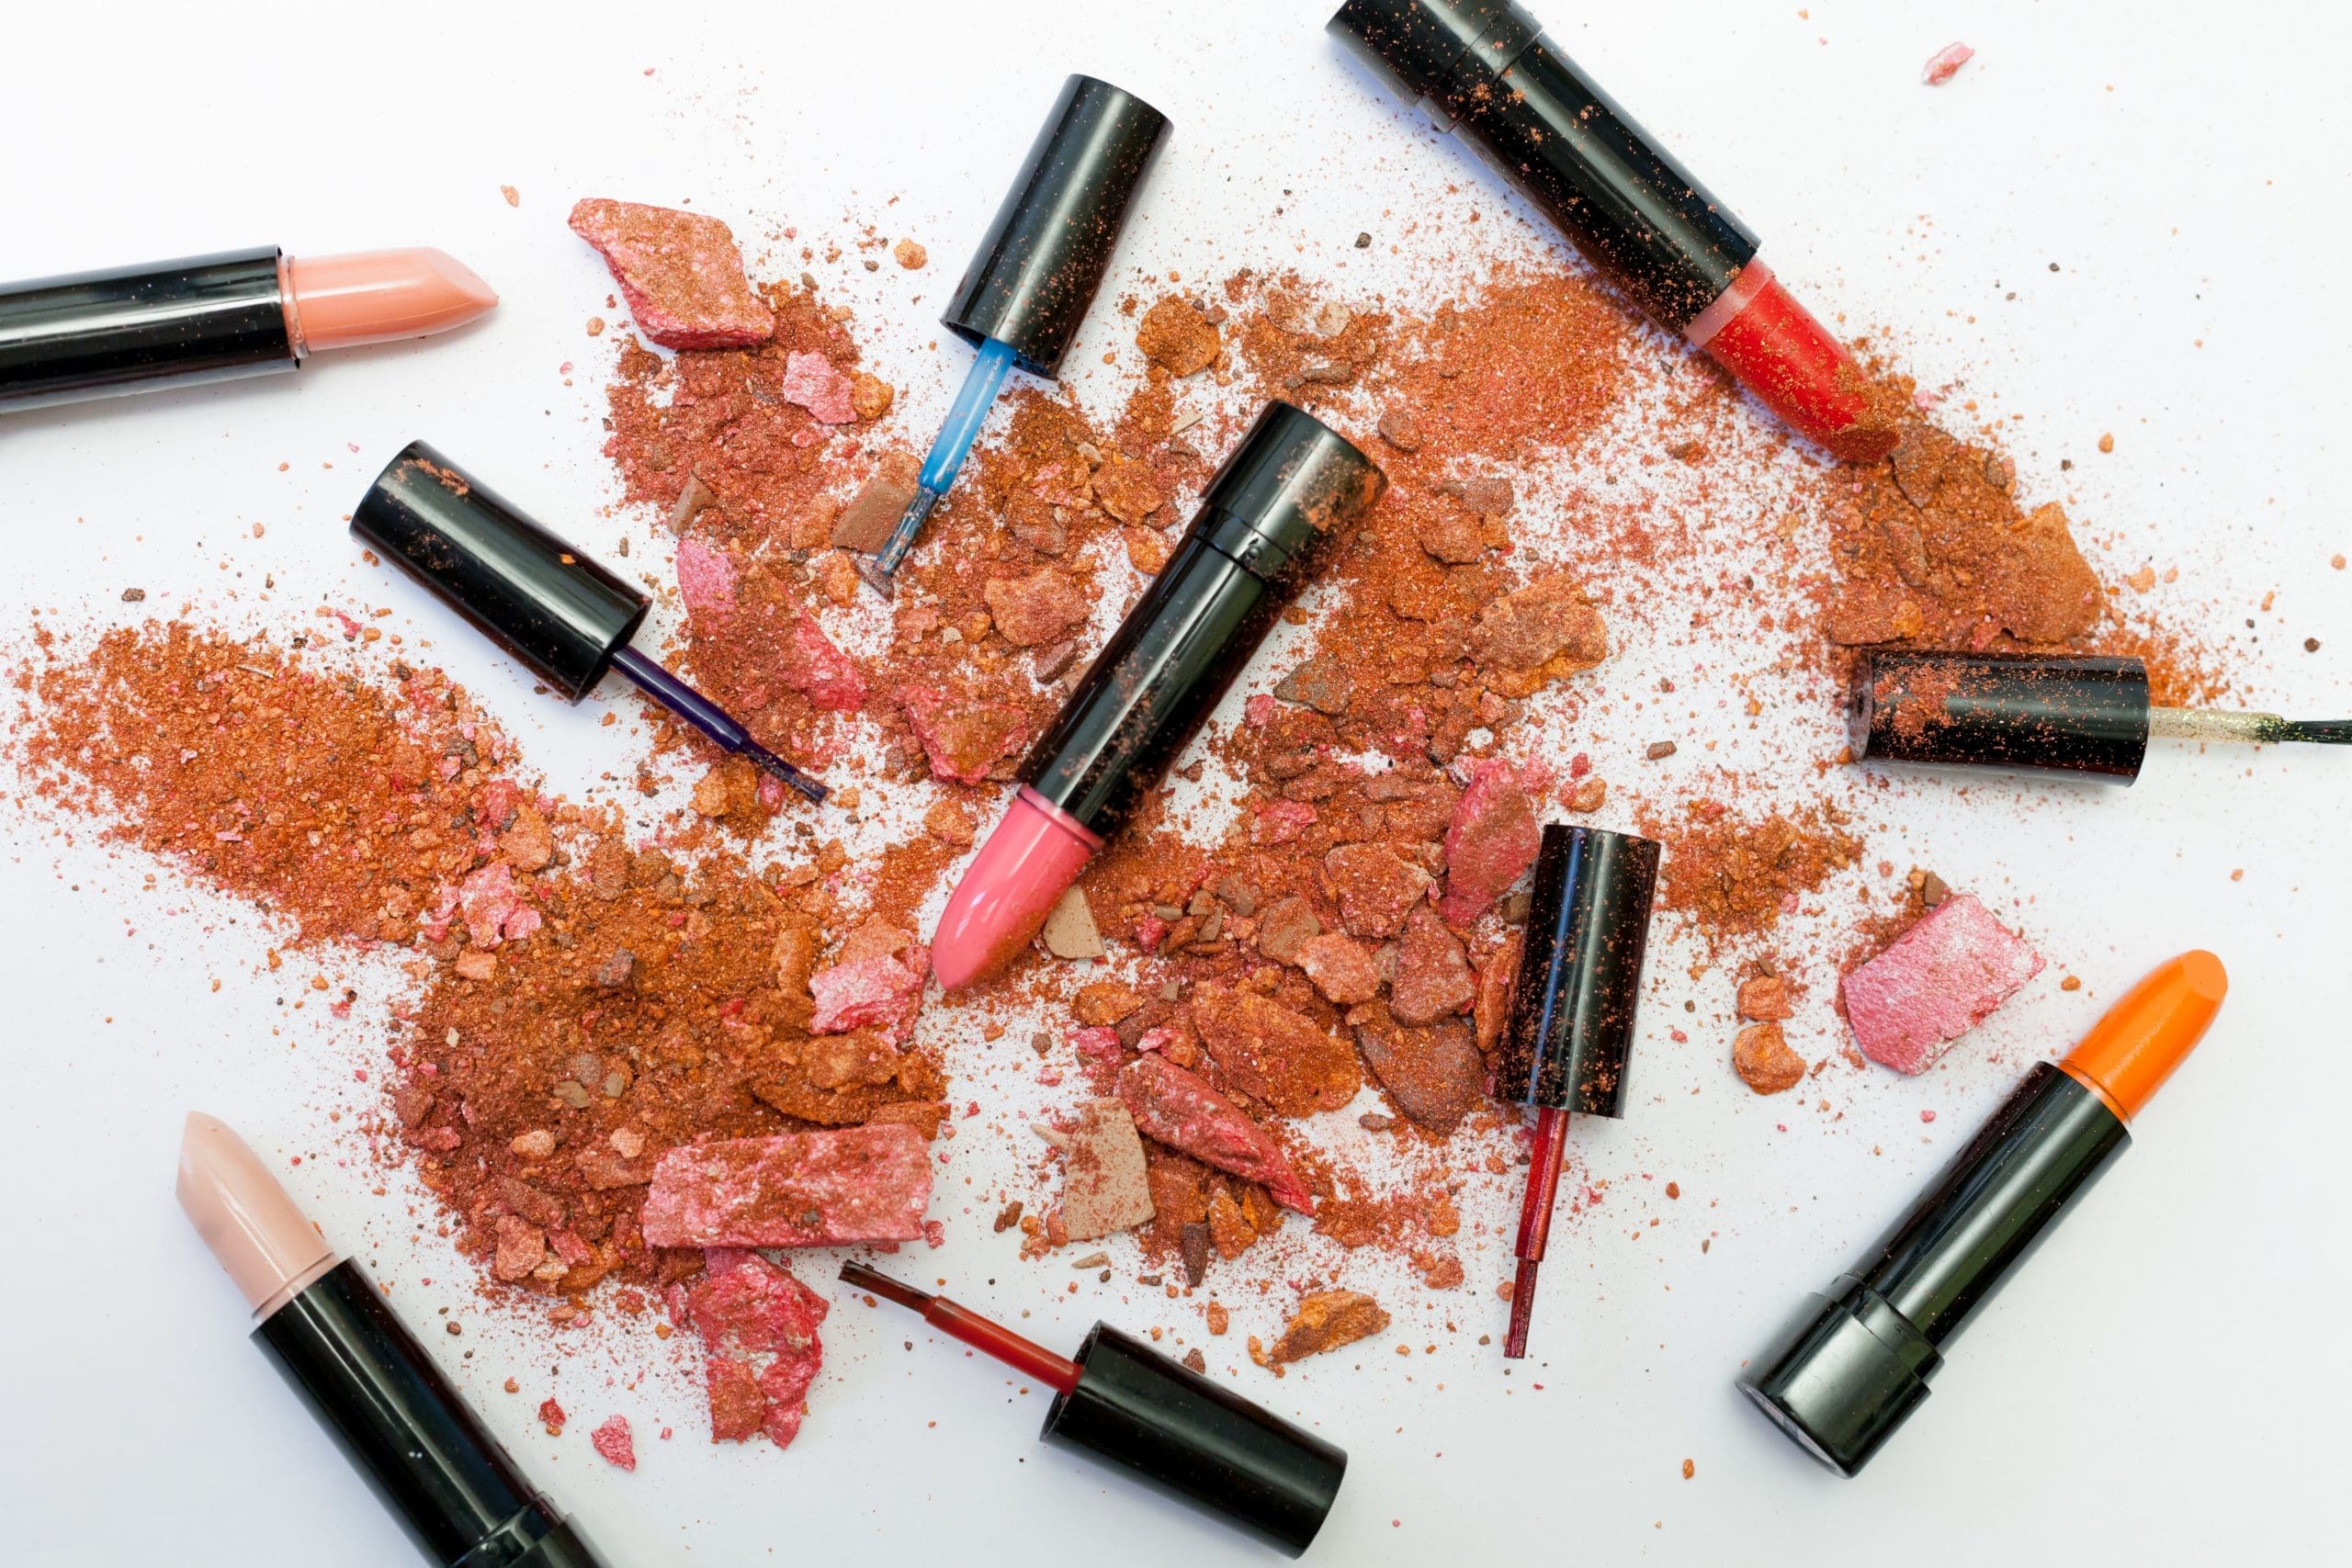 California Proposes Nation’s First Toxic-Free Cosmetics Law